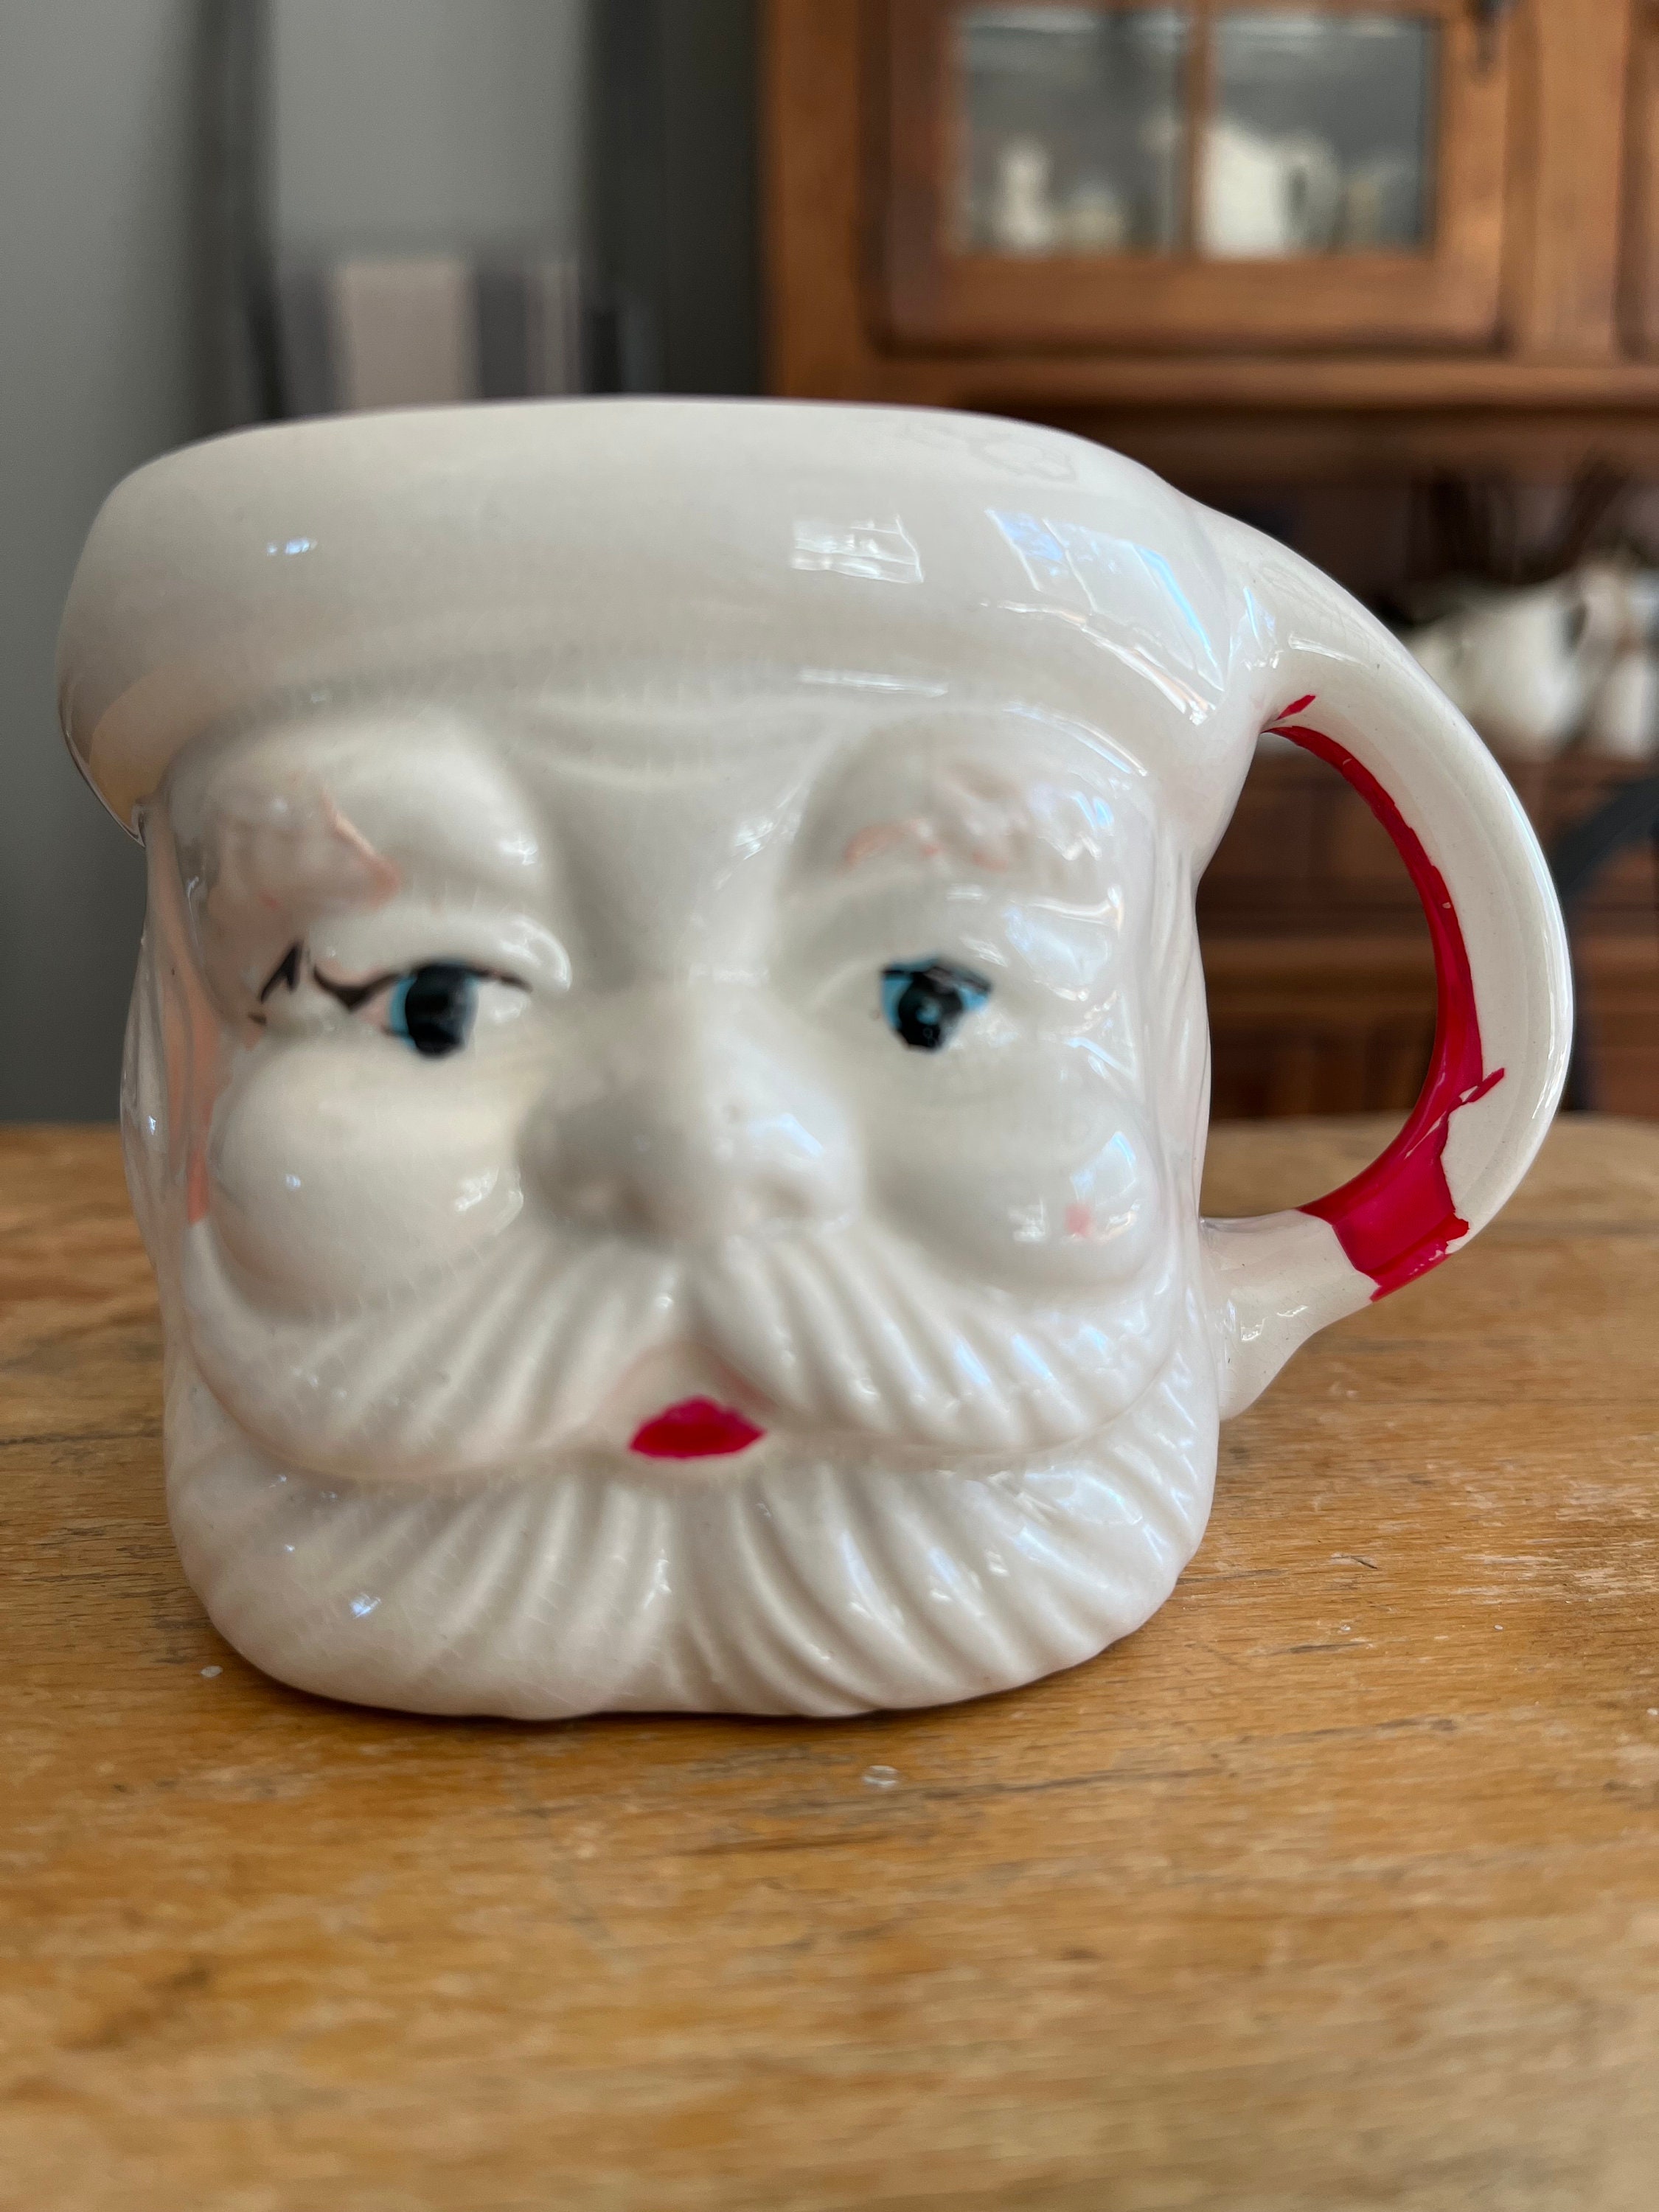 Vintage Old Man Face Mug Pitcher Coffee Cup